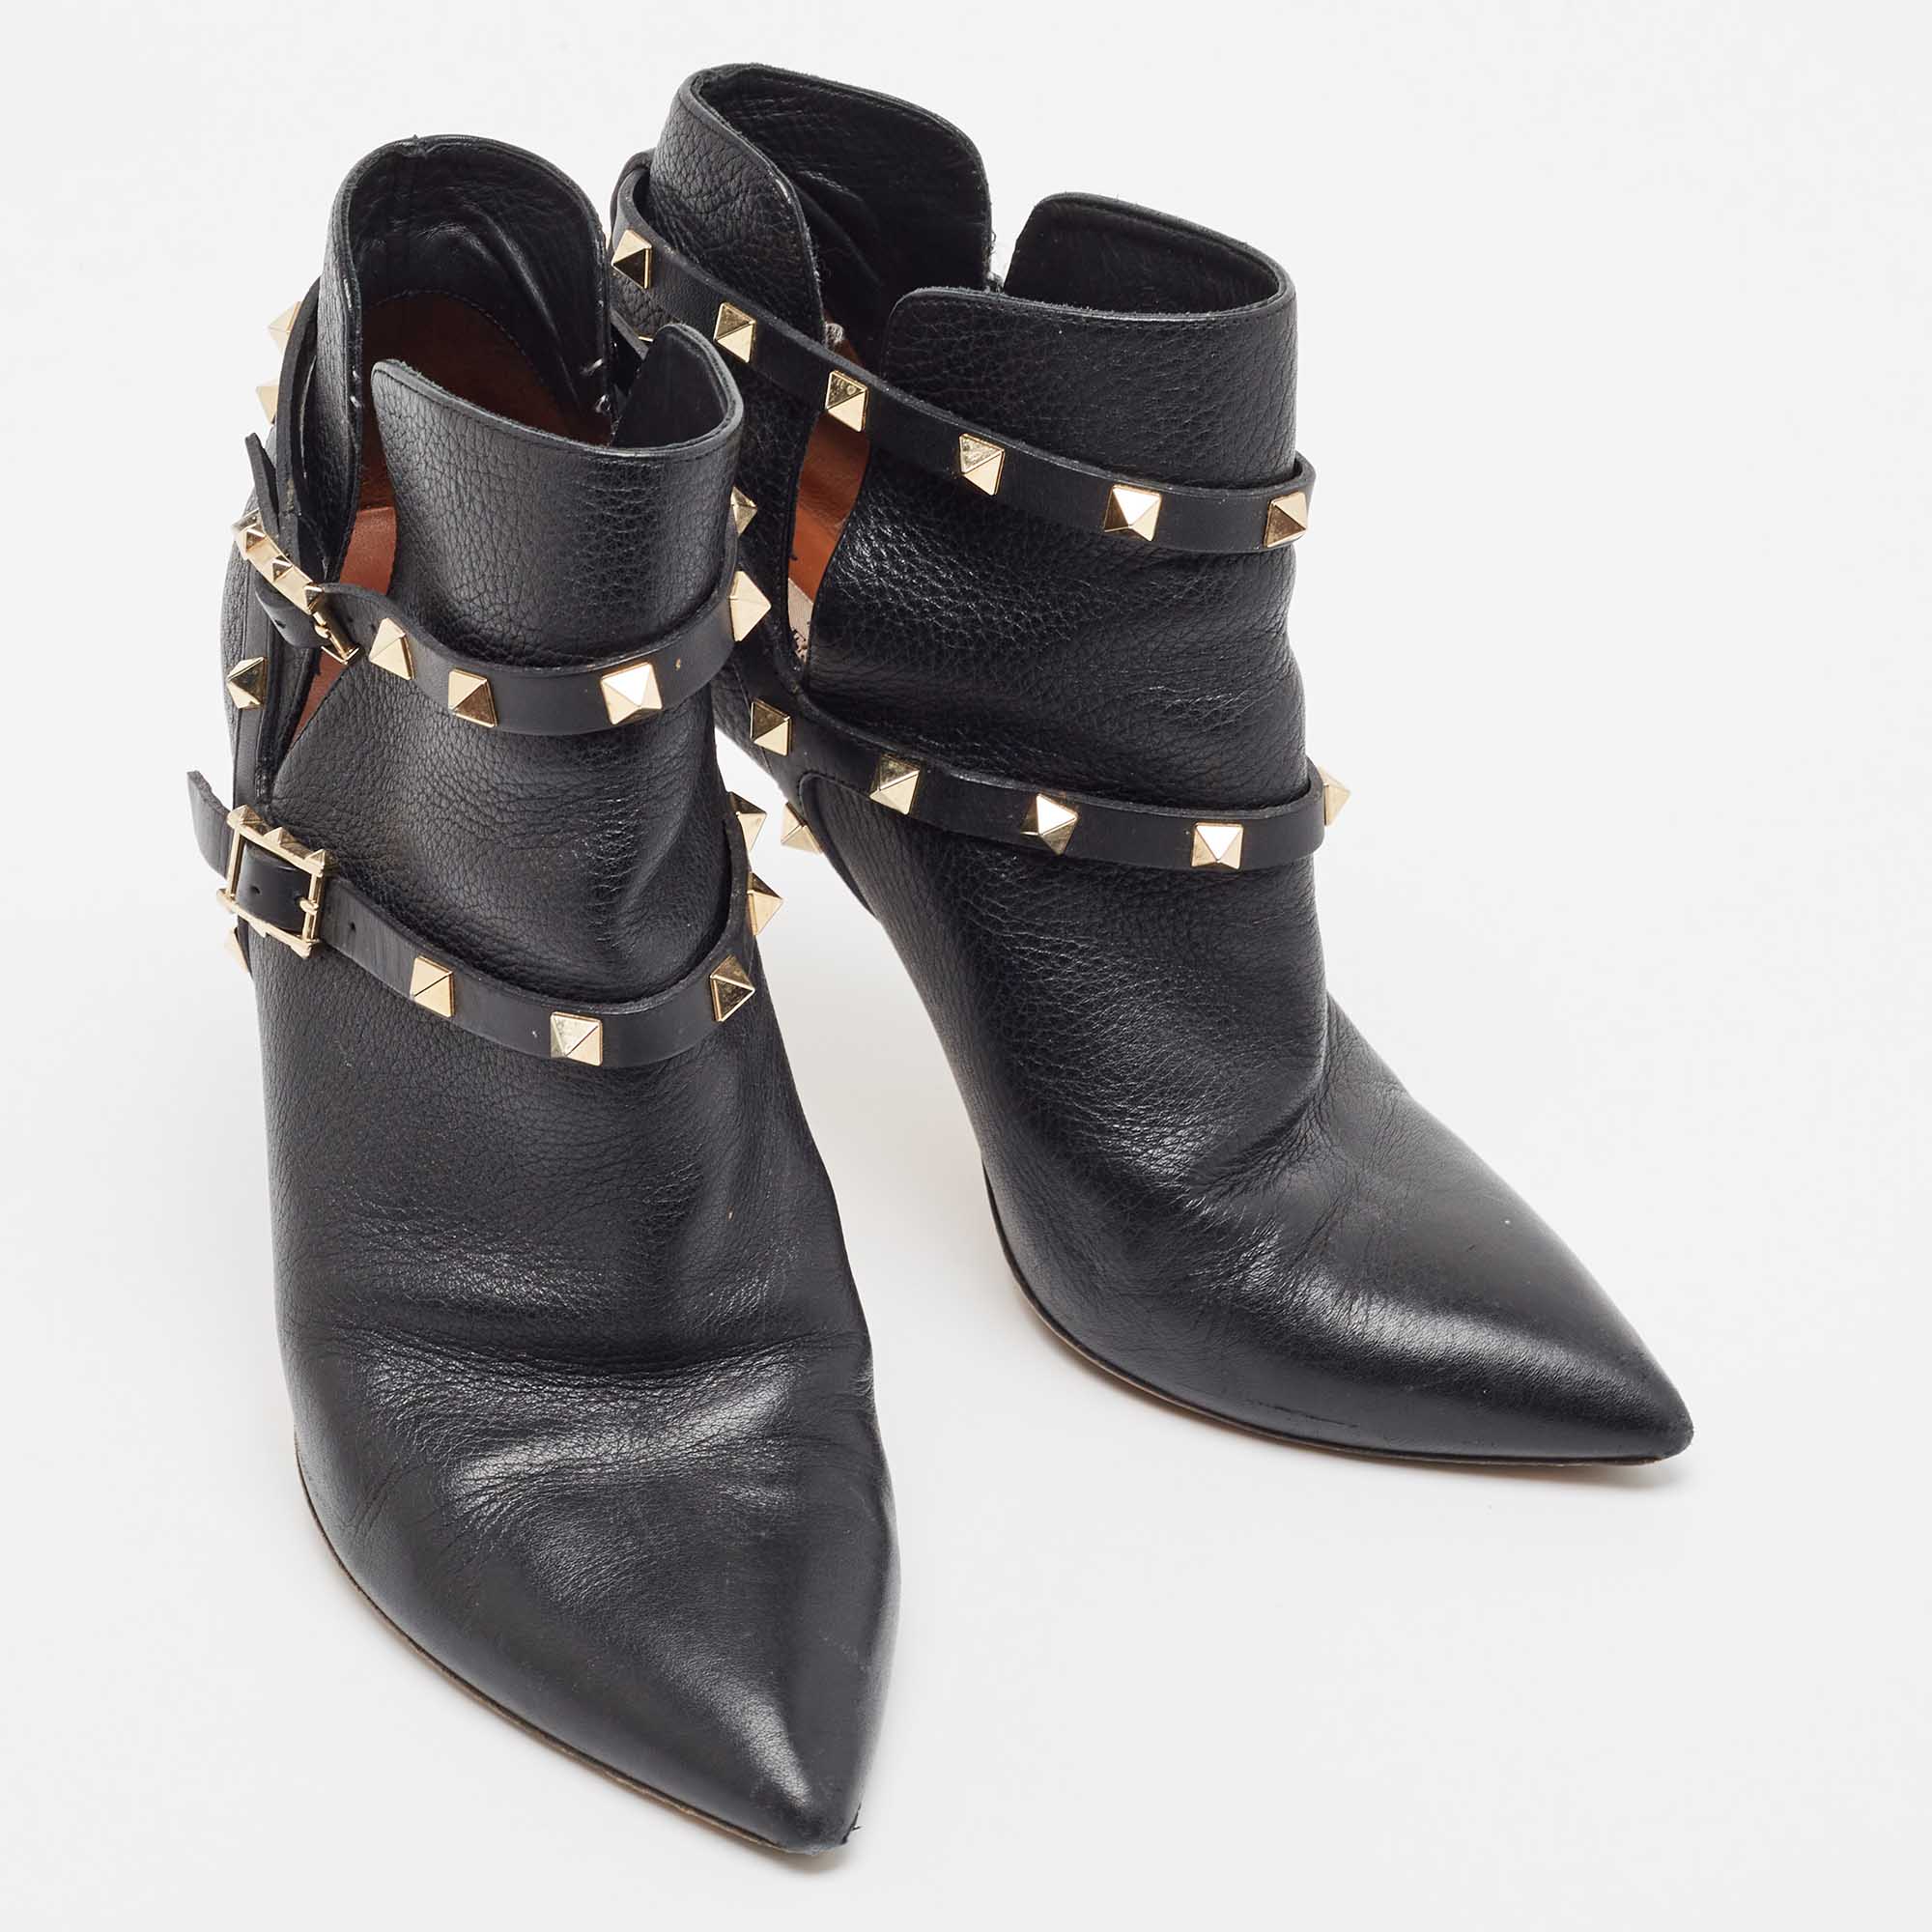 Valentino Black Leather Rockstud Ankle Boots Size 40